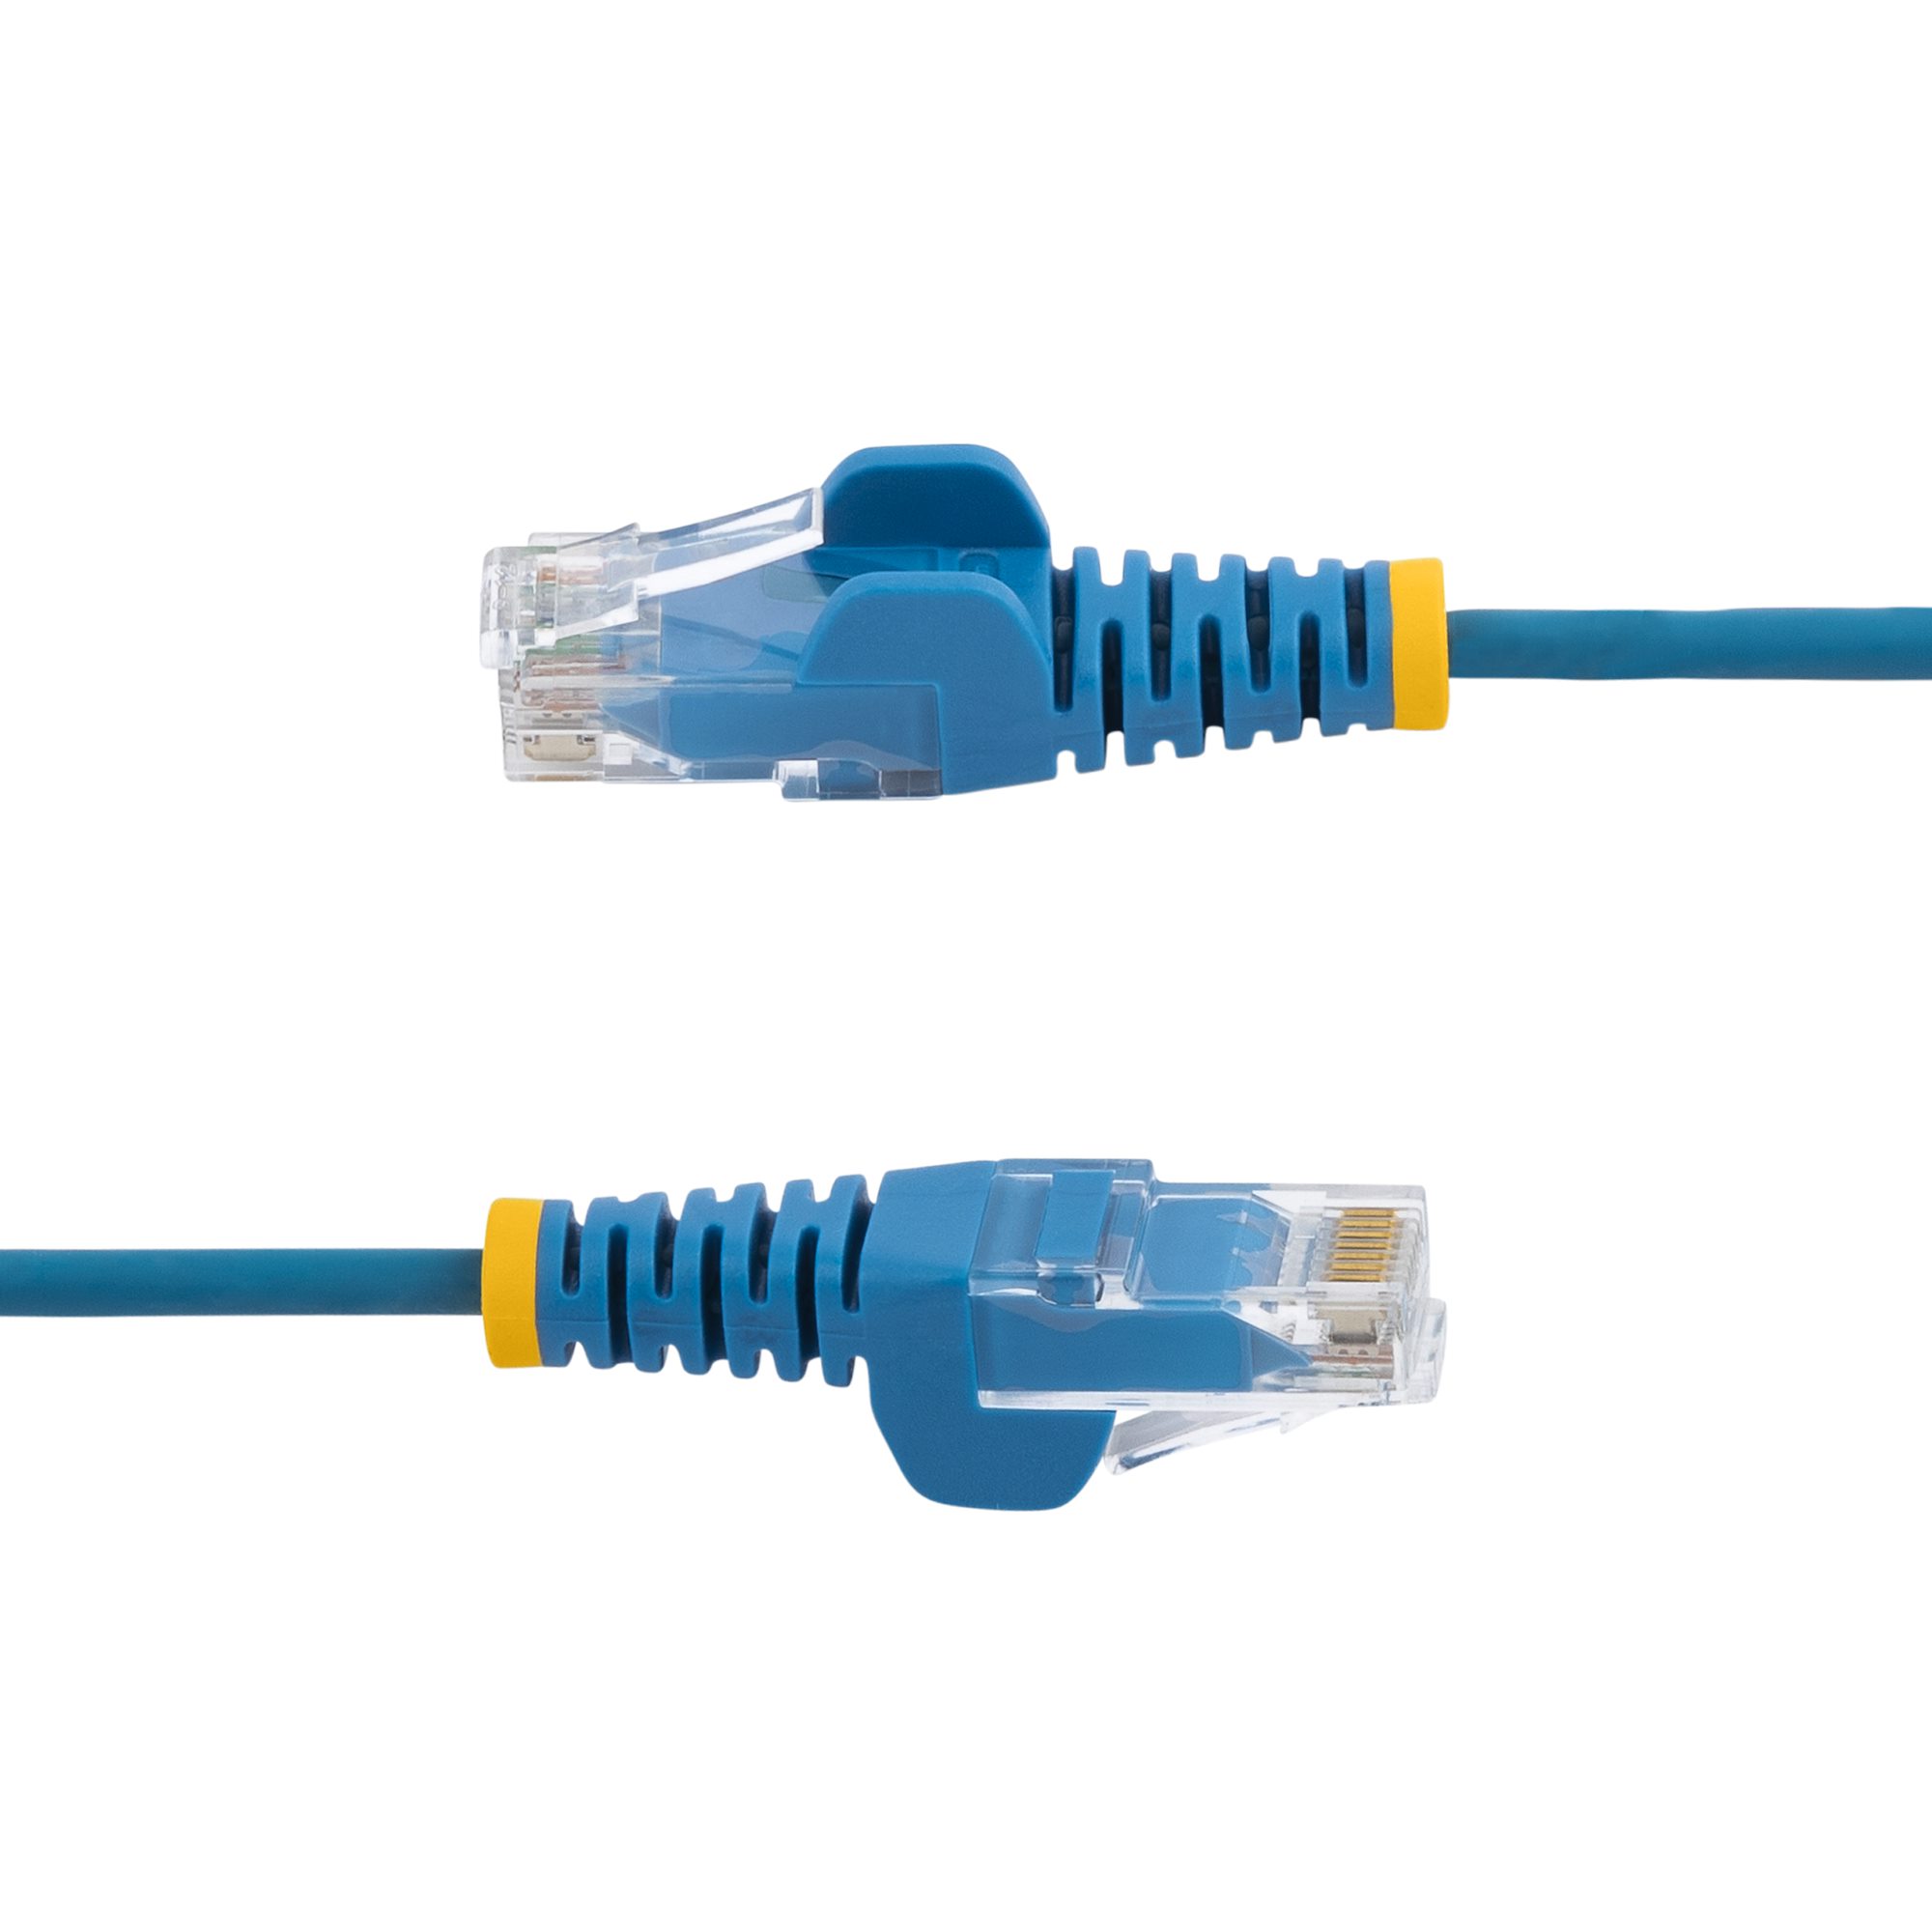 6in/0.15m/0.5ft Short Patch Cable, Cat6 Slim Ethernet Cable, Snagless &  Unshielded, Blue -  Australia